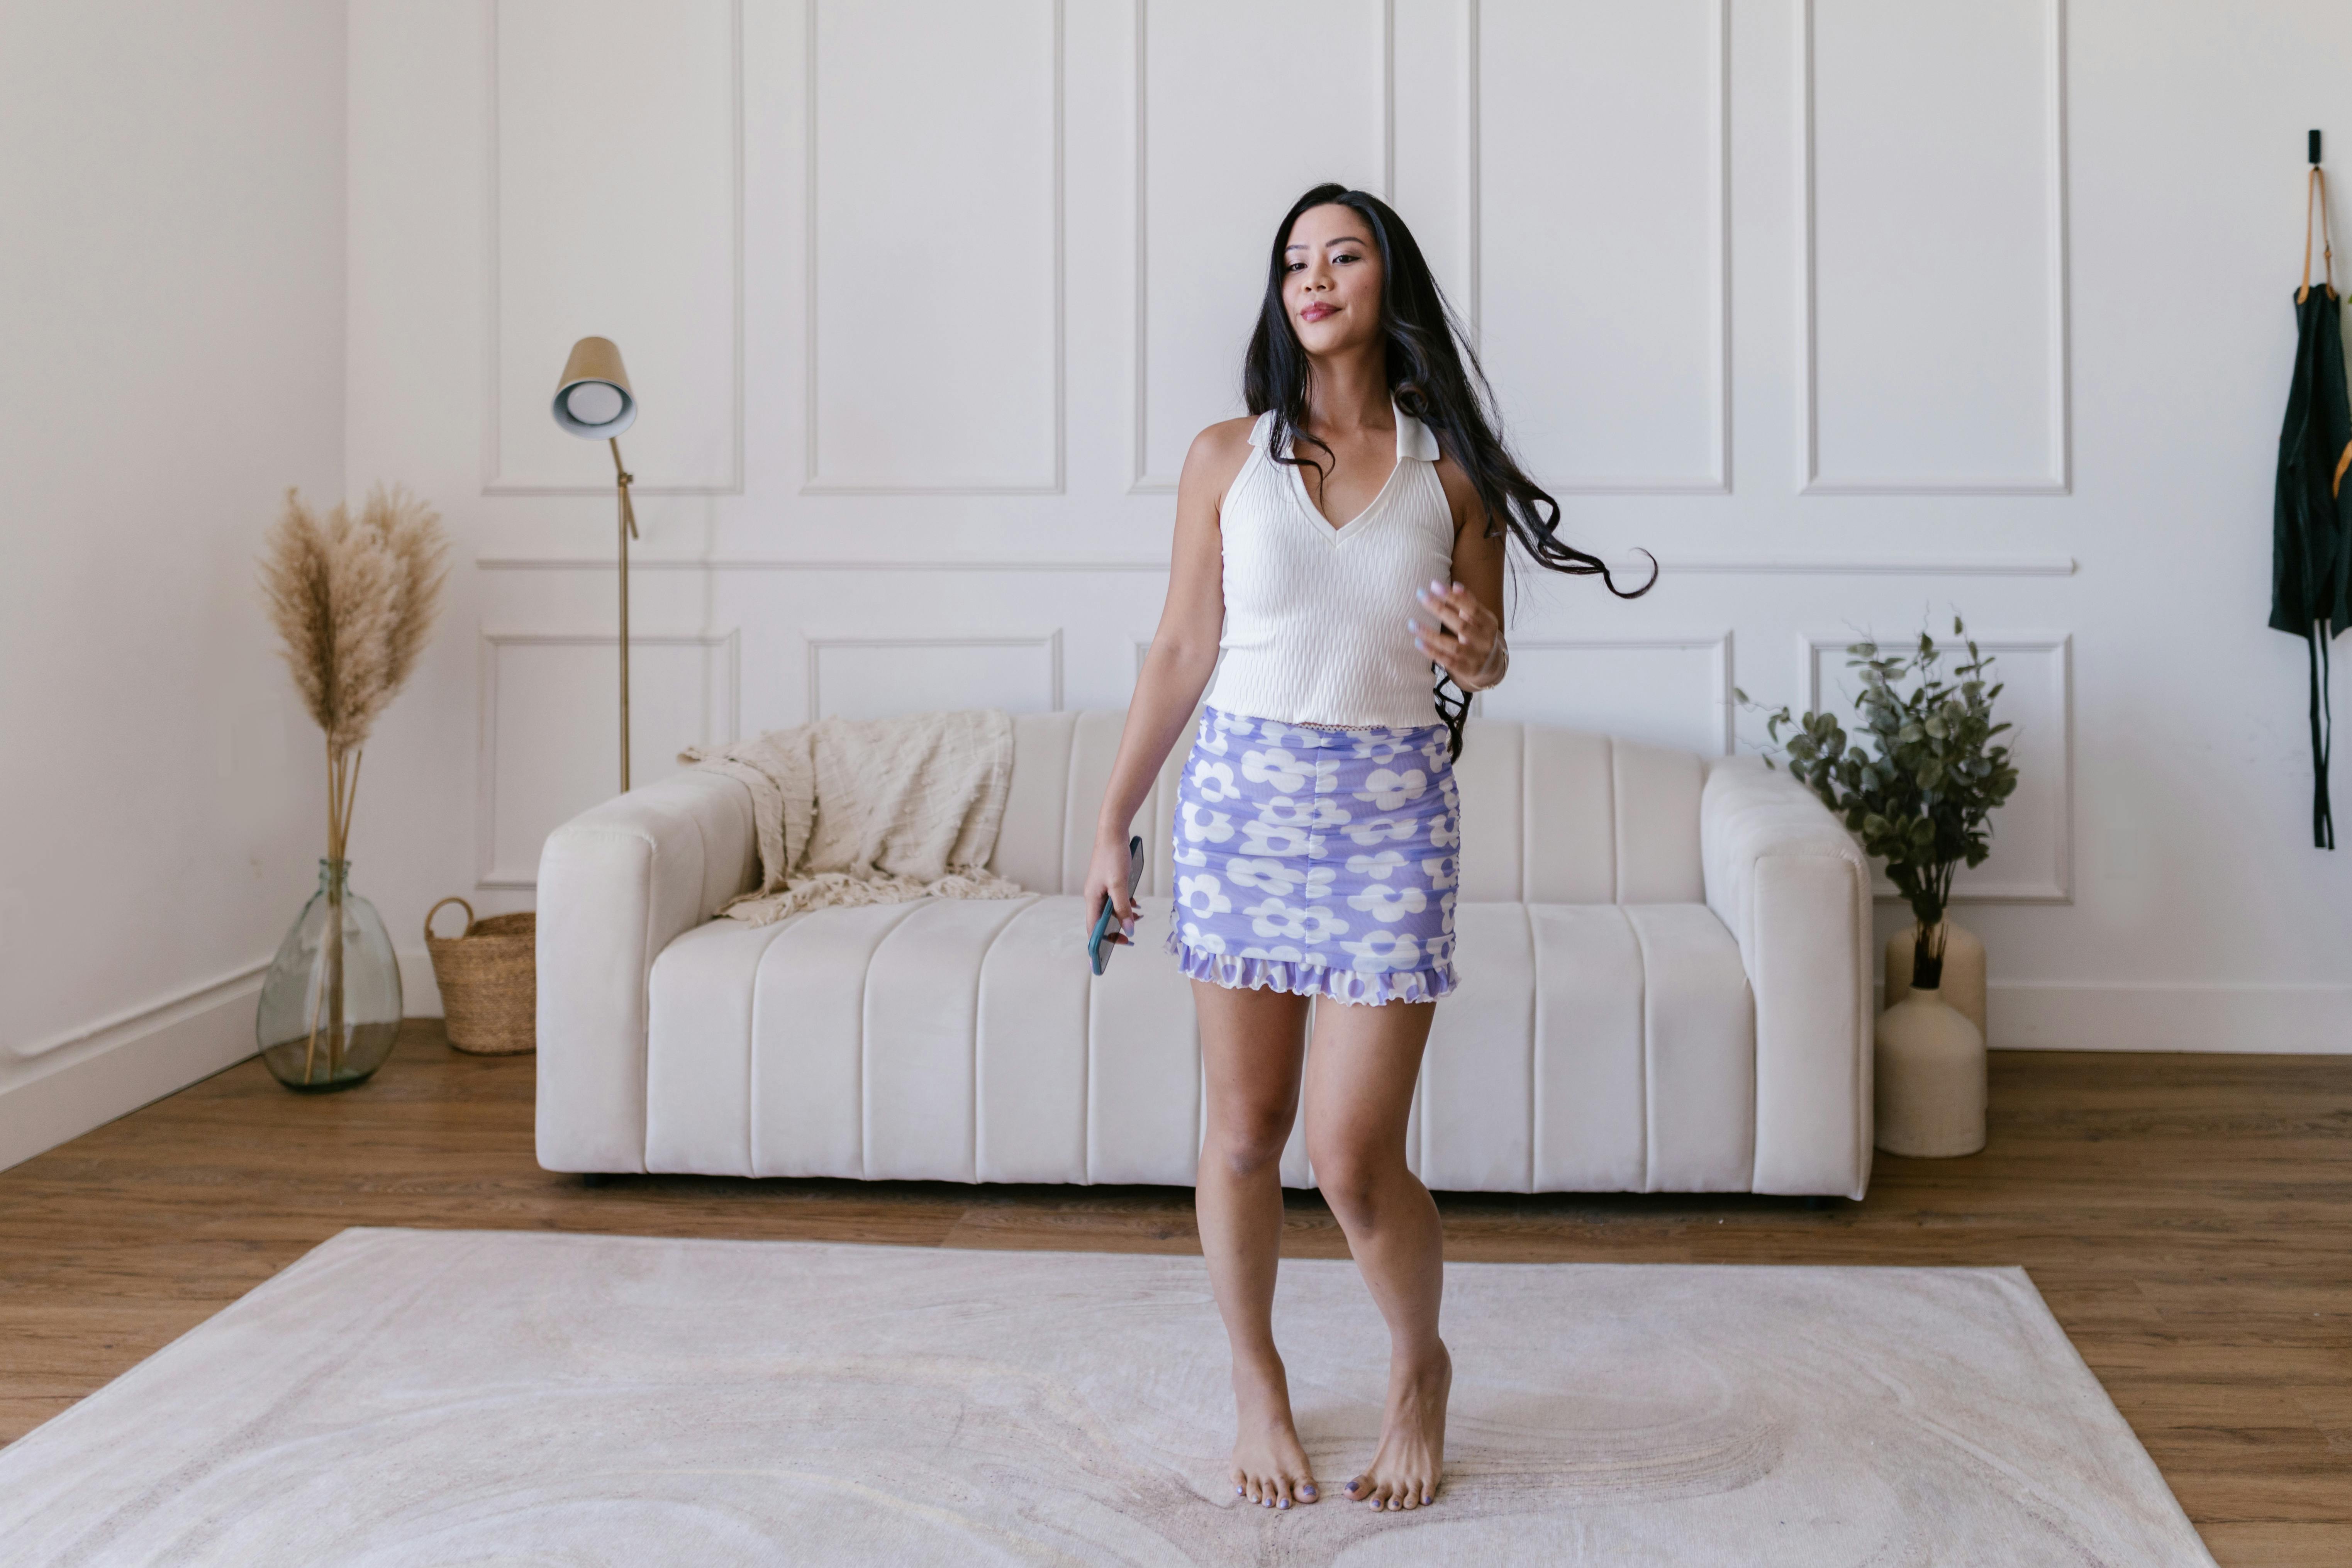 long haired woman in short skirt posing with bare feet on a white carpet